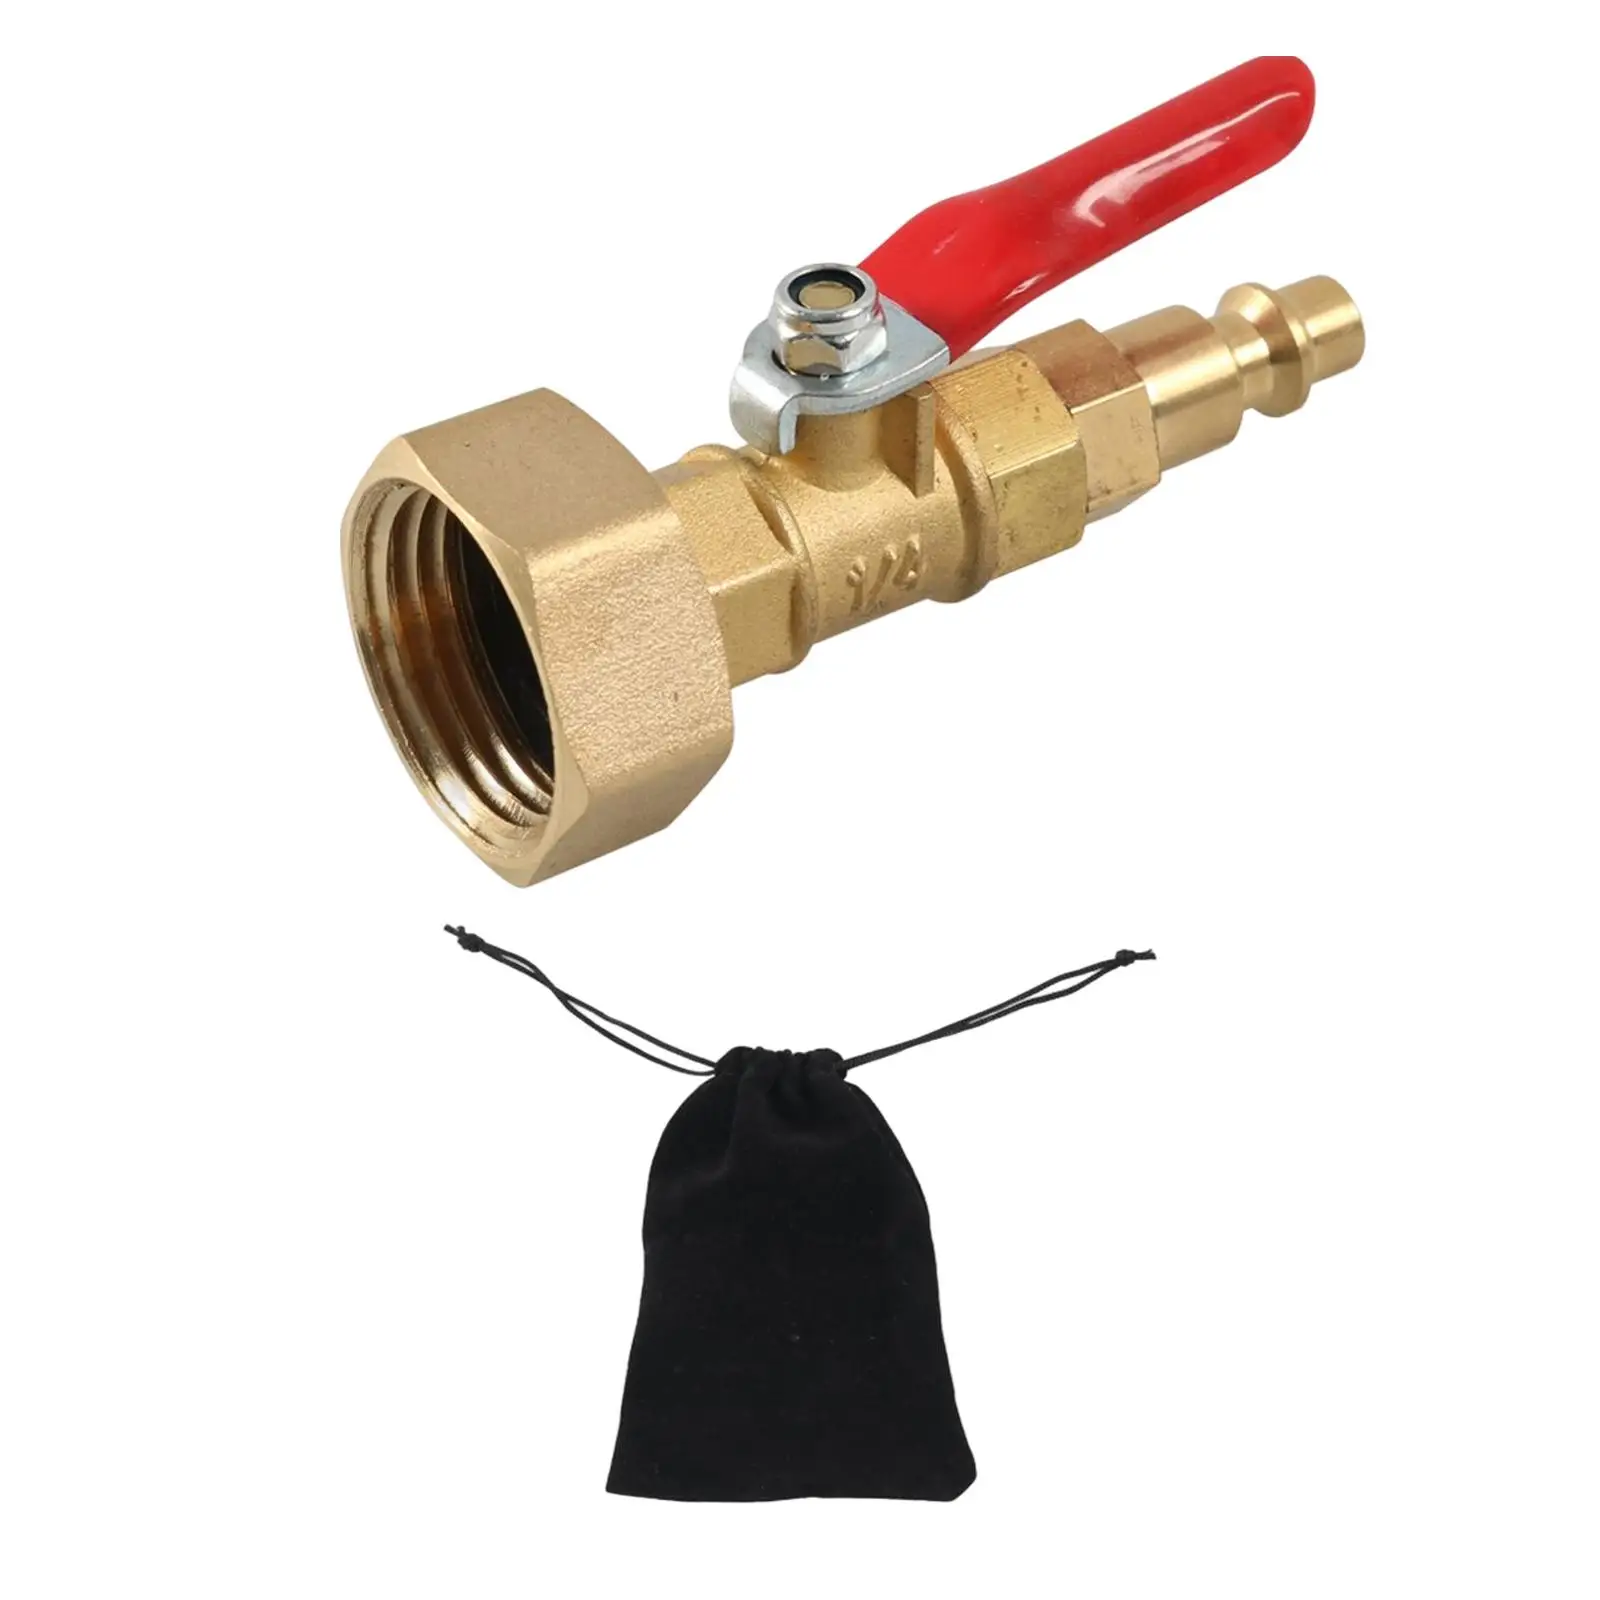 Brass Winterize Adapter Fit for RV Blowing Out Water Winterize Water Lines